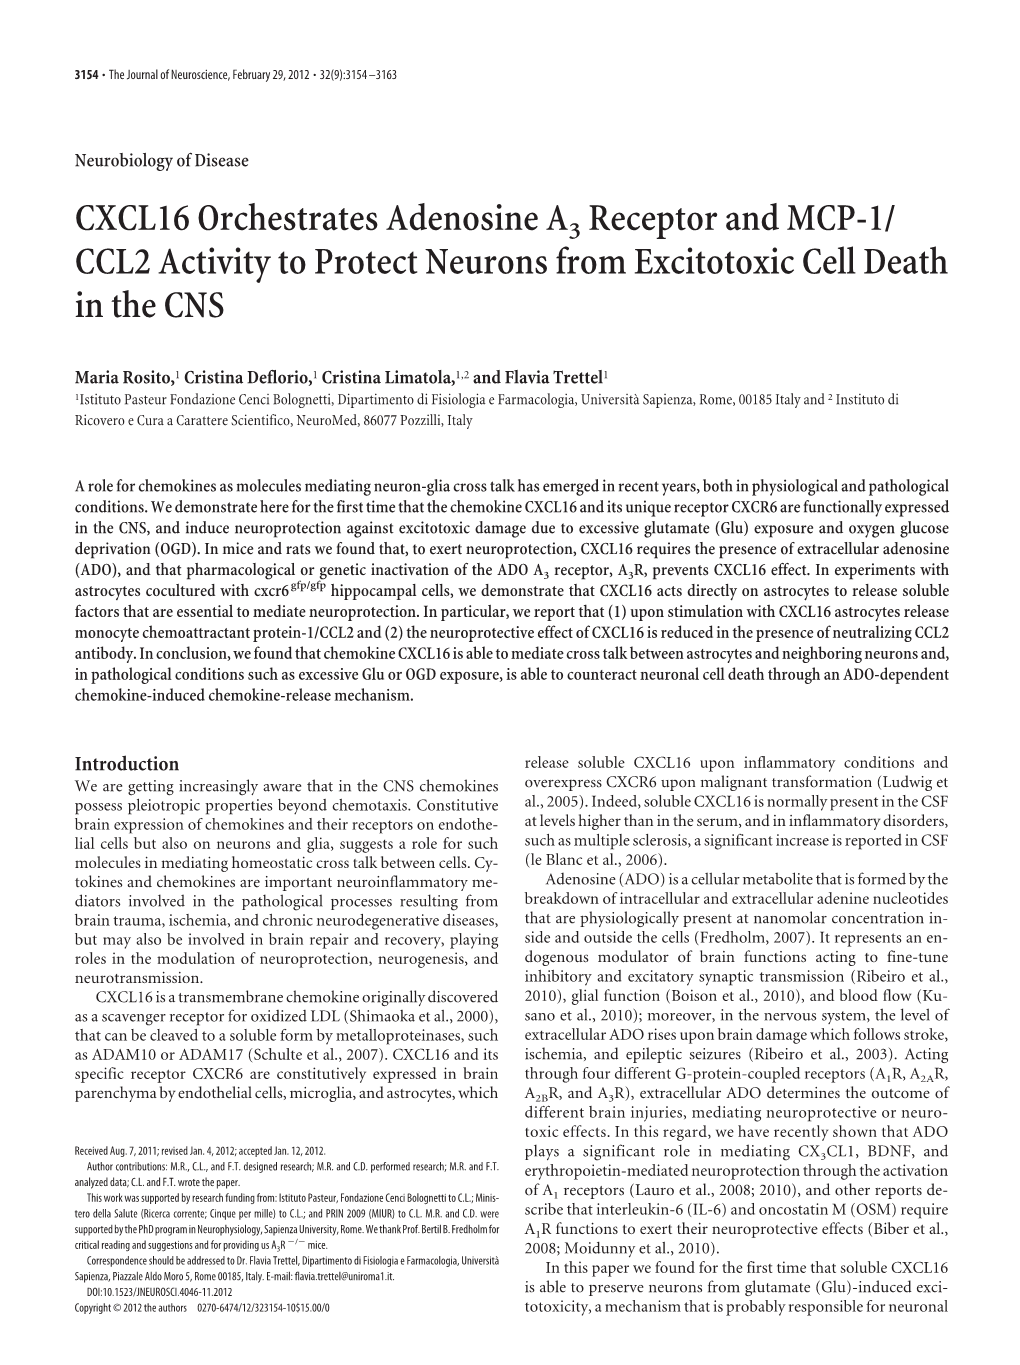 CXCL16 Orchestrates Adenosine A3 Receptor and MCP-1/ CCL2 Activity to Protect Neurons from Excitotoxic Cell Death in the CNS